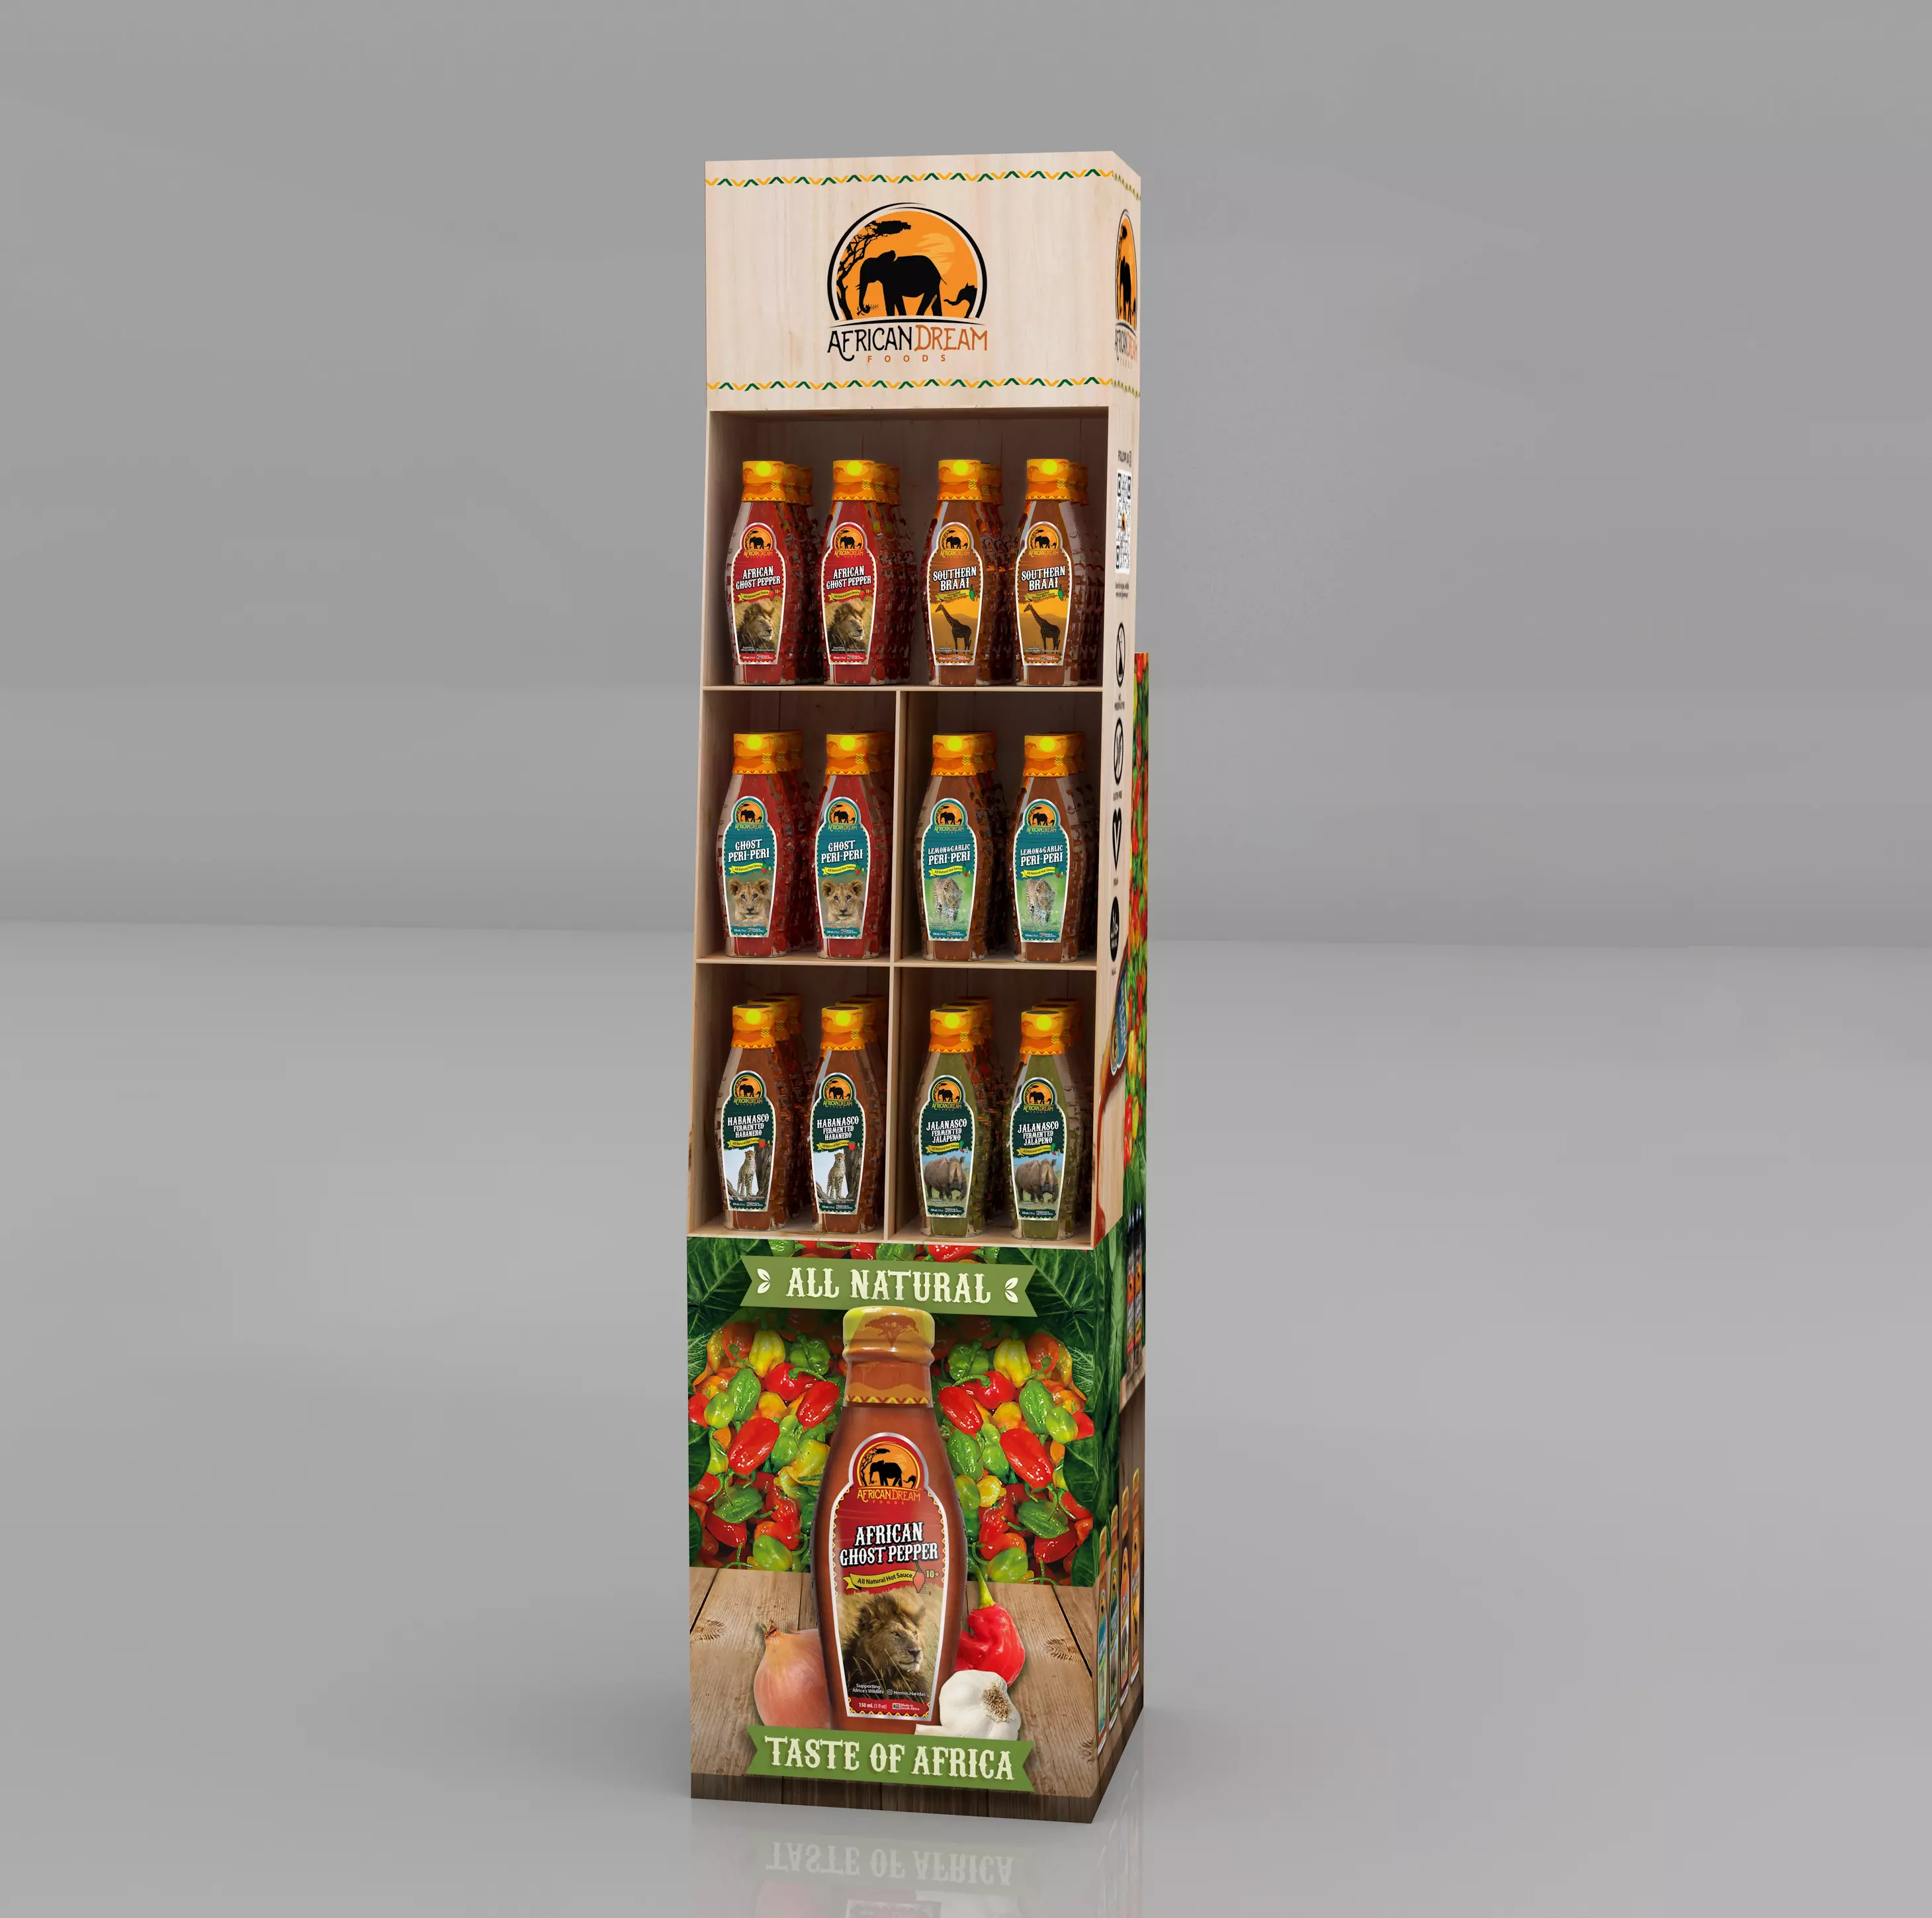 African Dream Foods DS-004 display shipper - slight angle